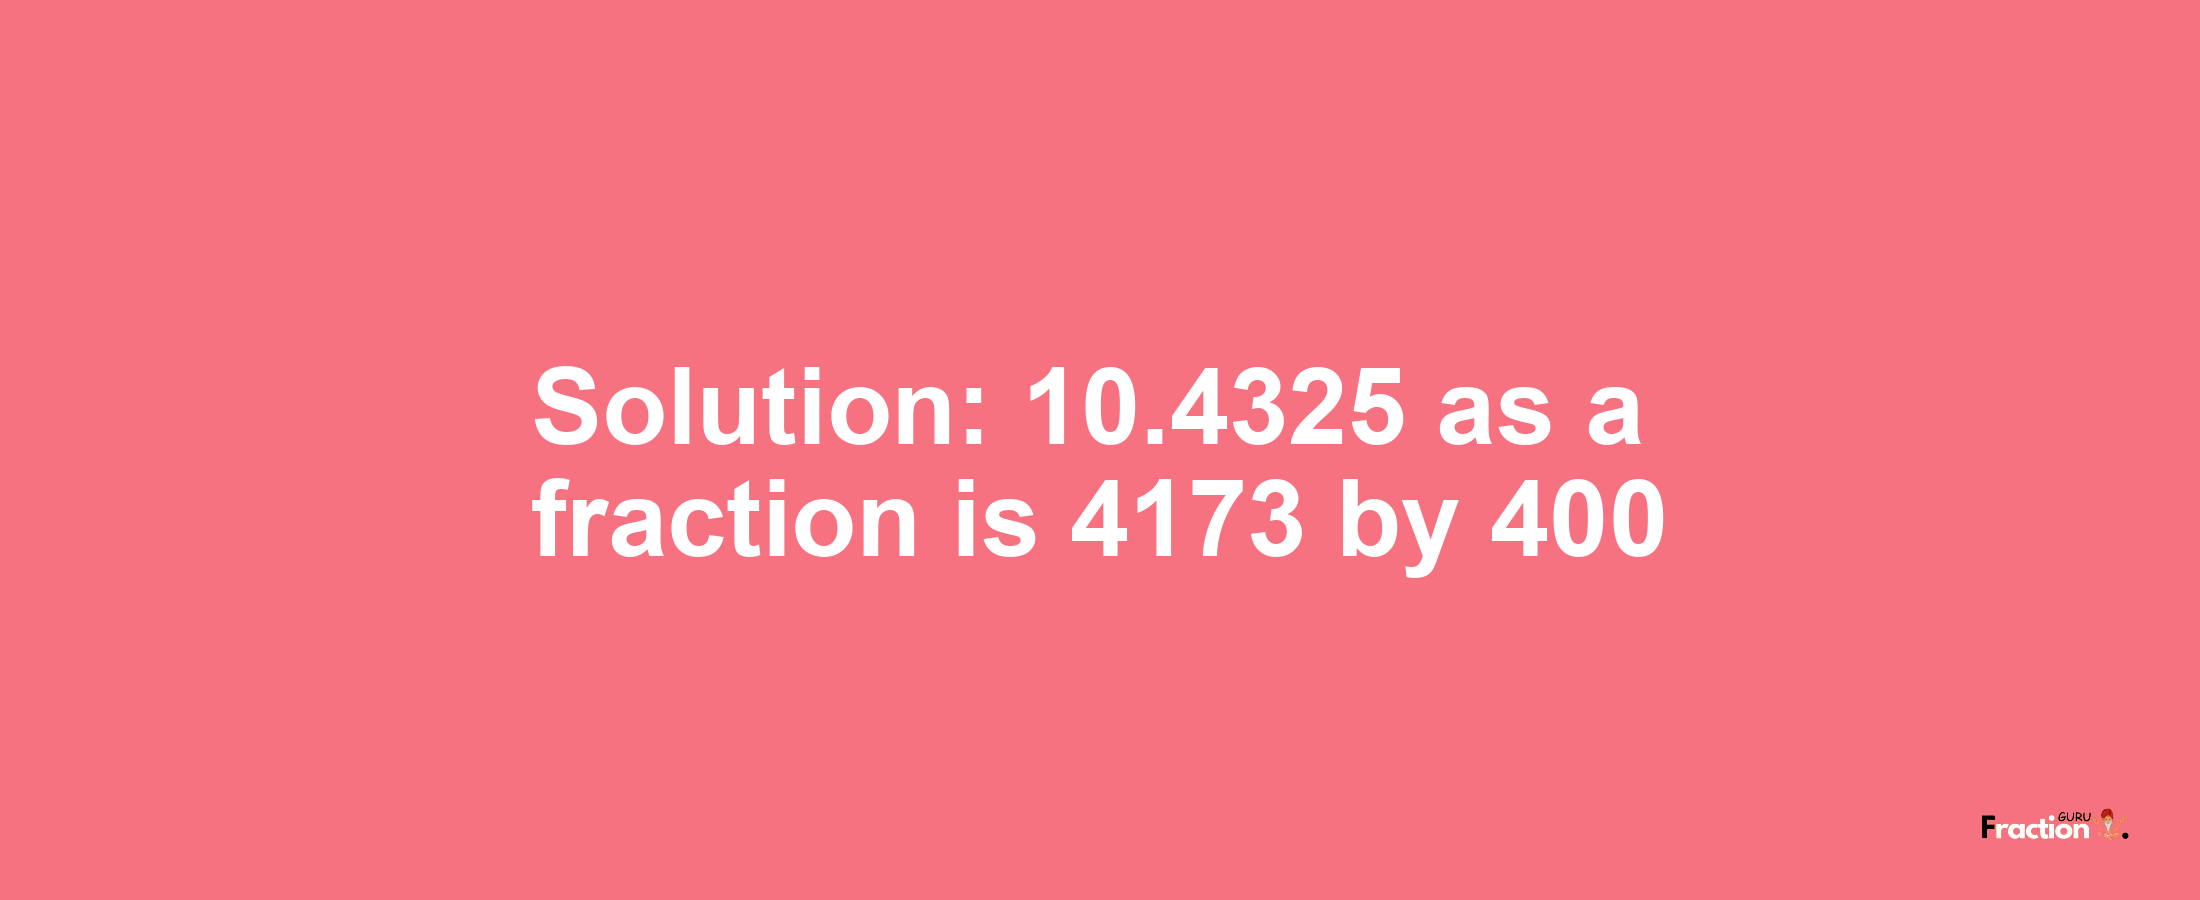 Solution:10.4325 as a fraction is 4173/400